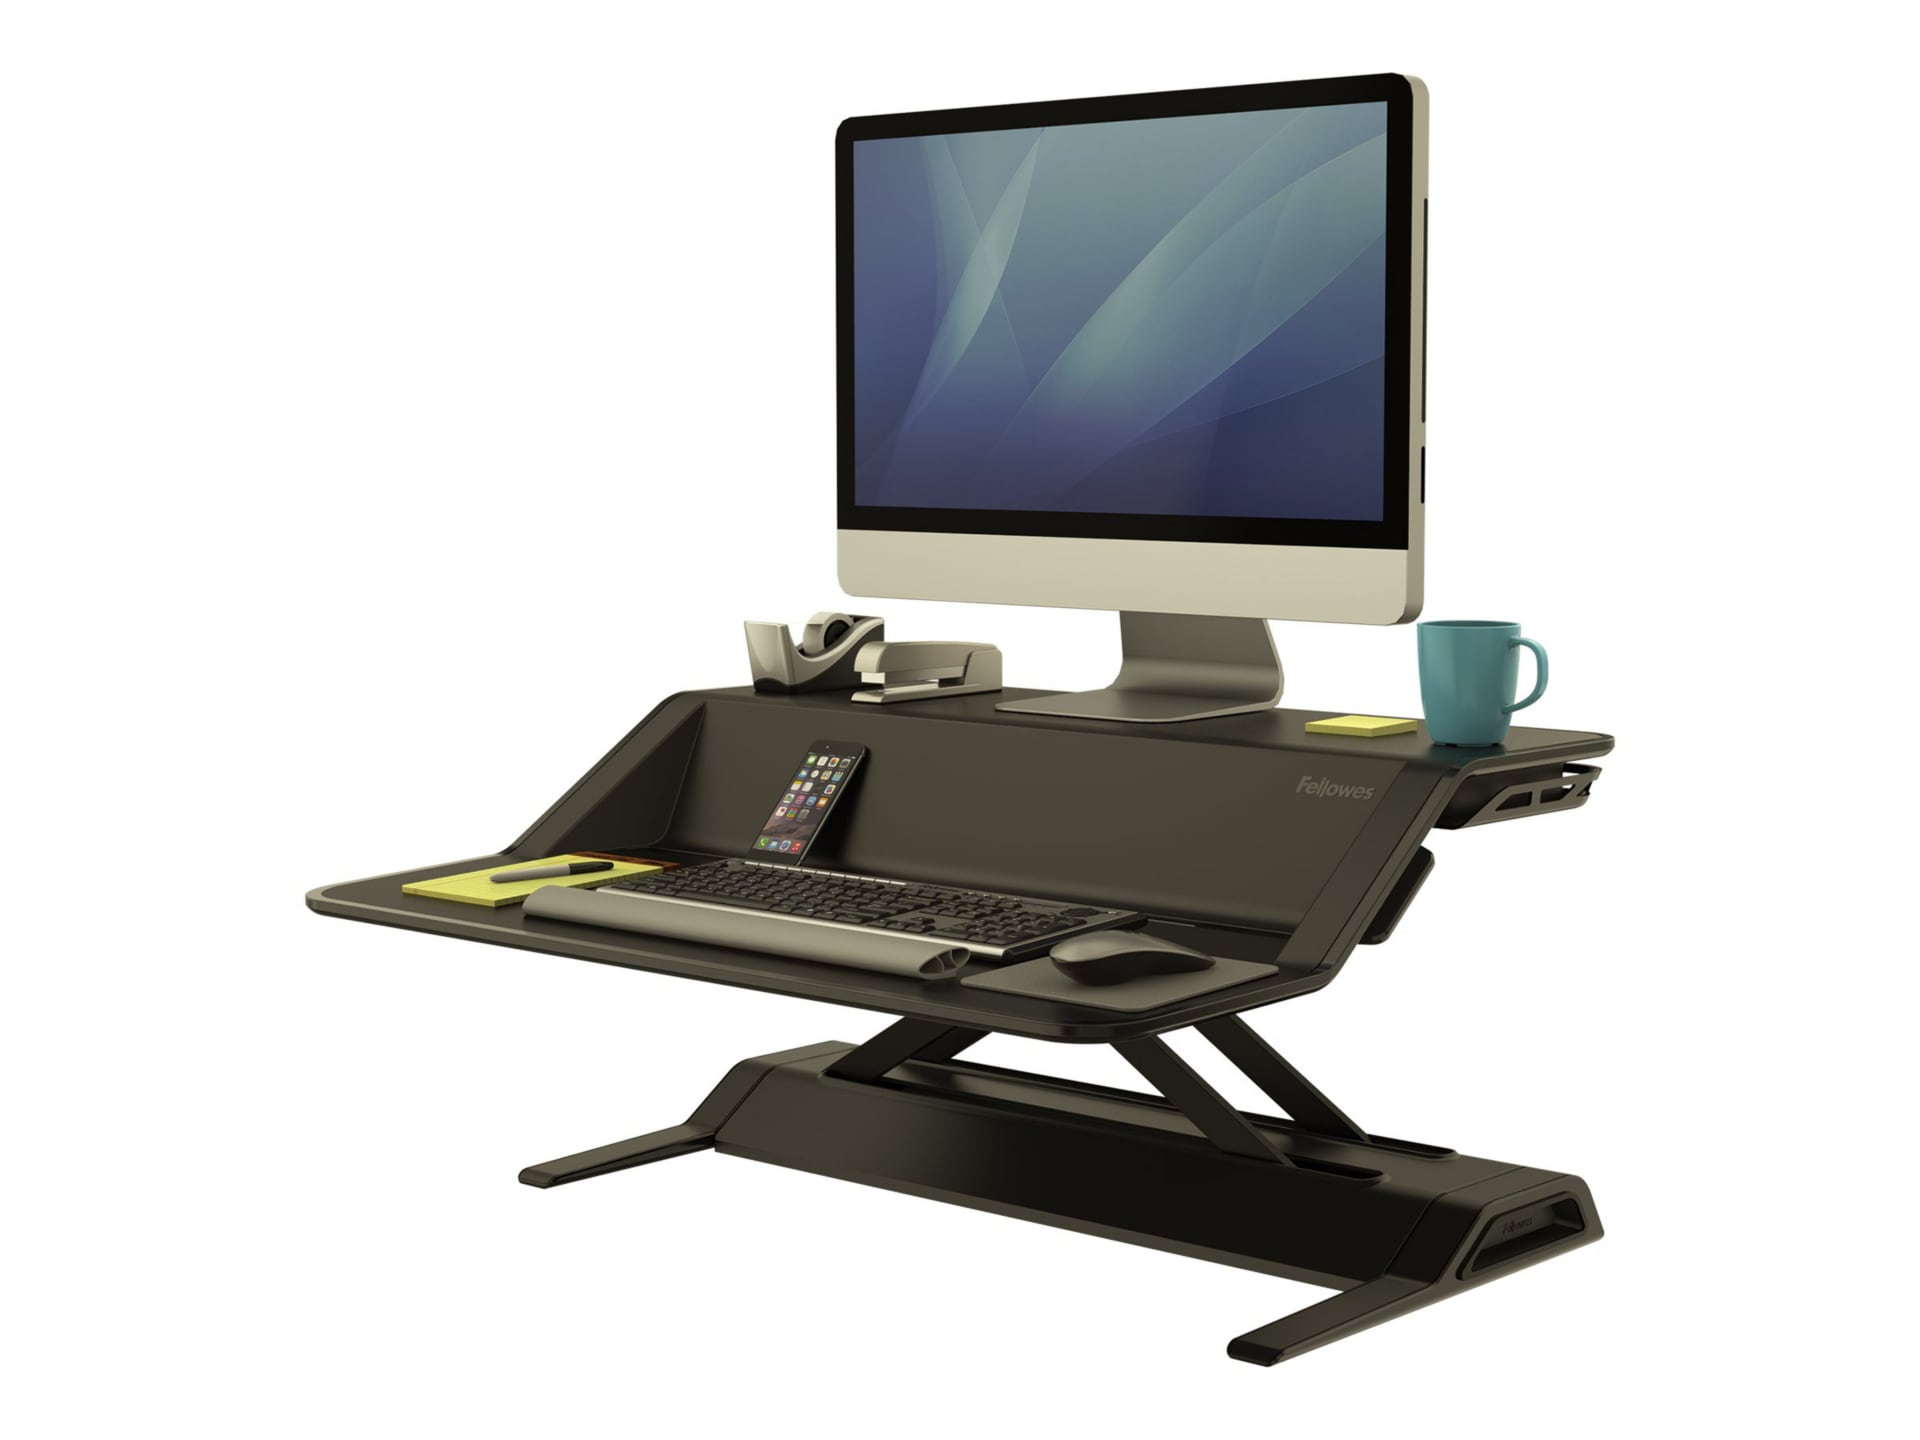 Fellowes Lotus Sit-Stand Workstation stand - Waterfall - for LCD display / keyboard / mouse - black